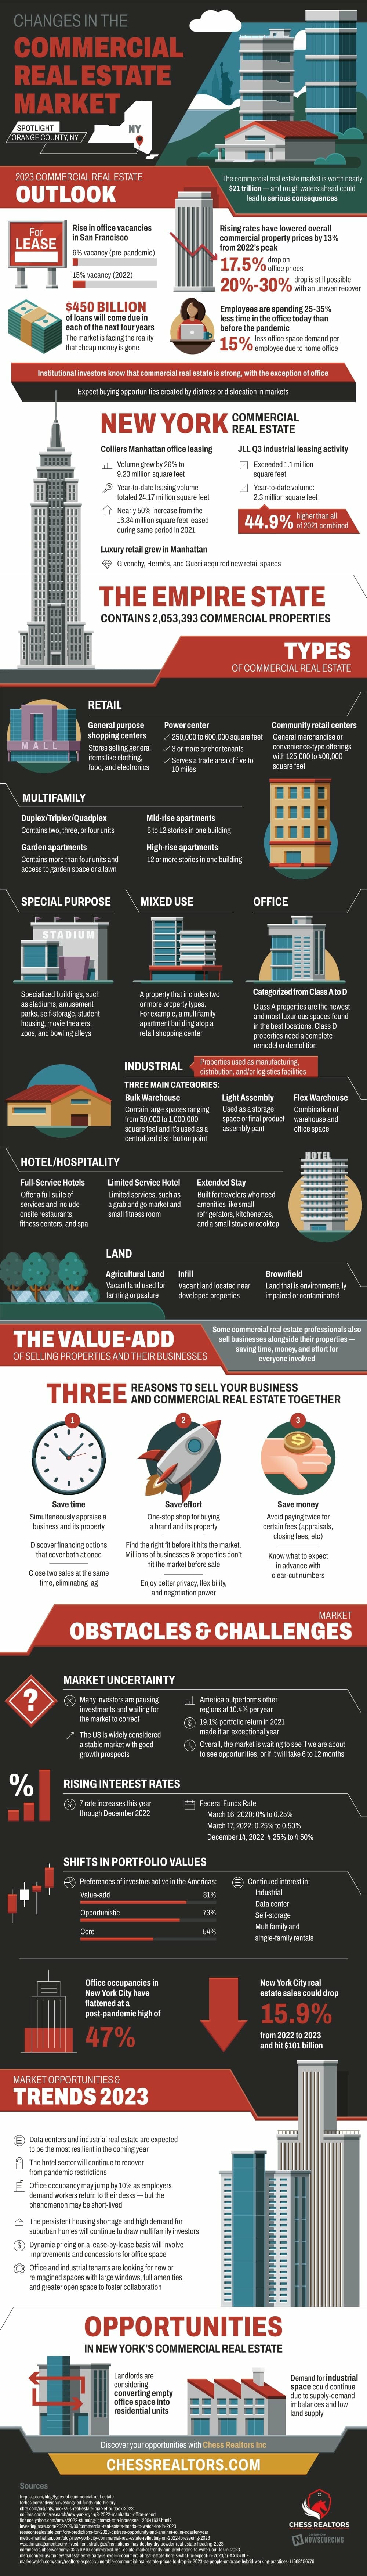 commercial real estate market infographic